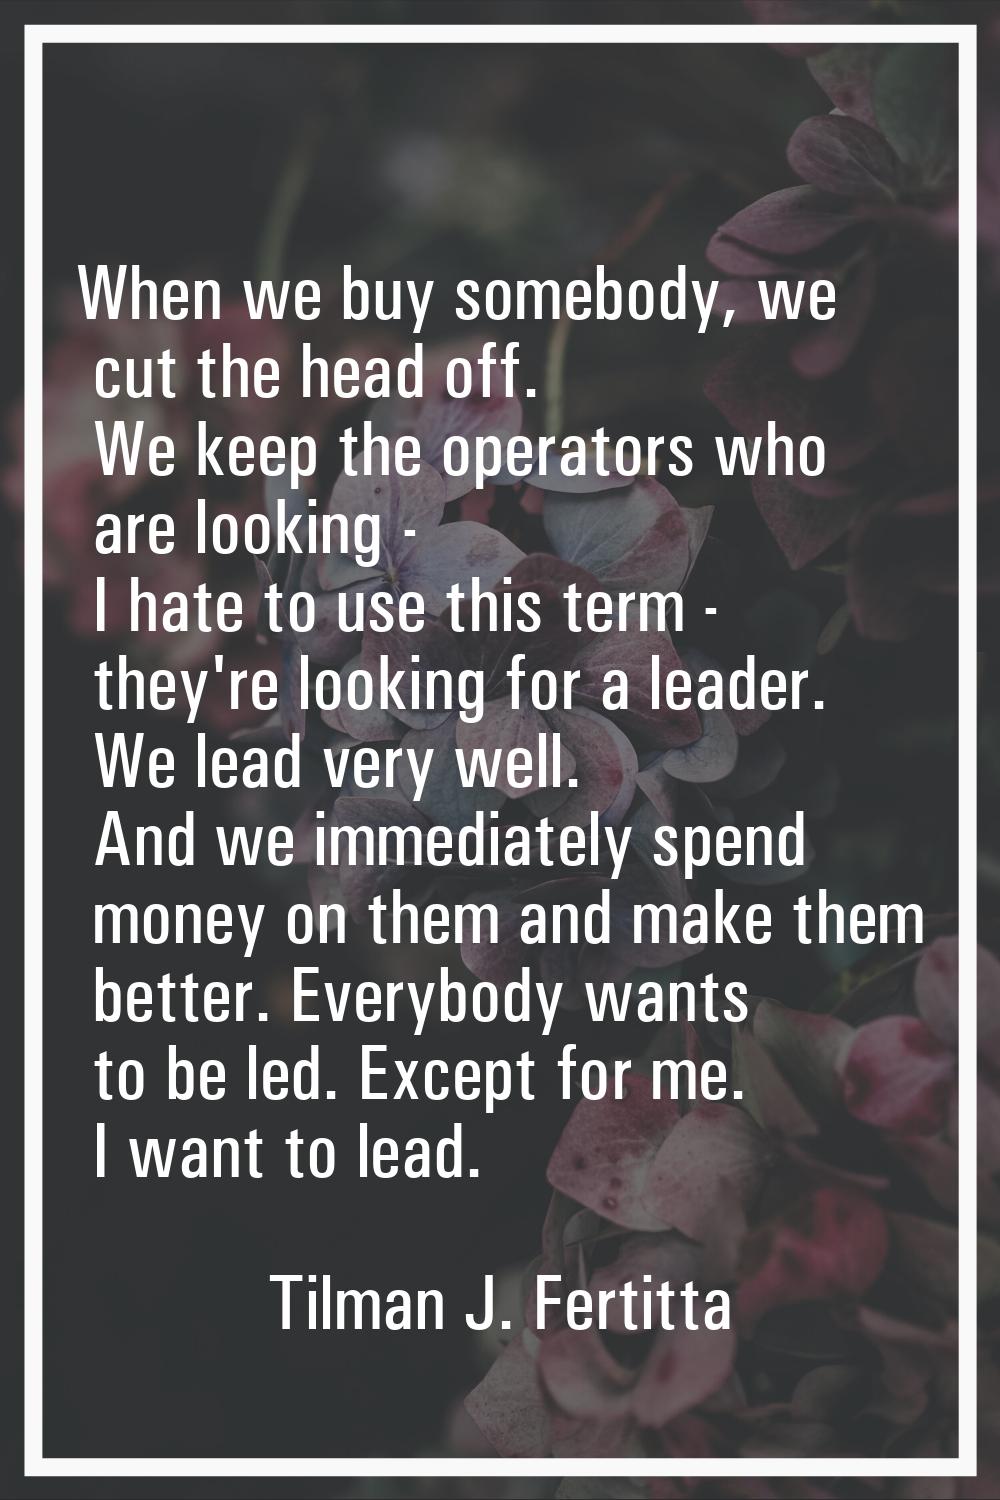 When we buy somebody, we cut the head off. We keep the operators who are looking - I hate to use th